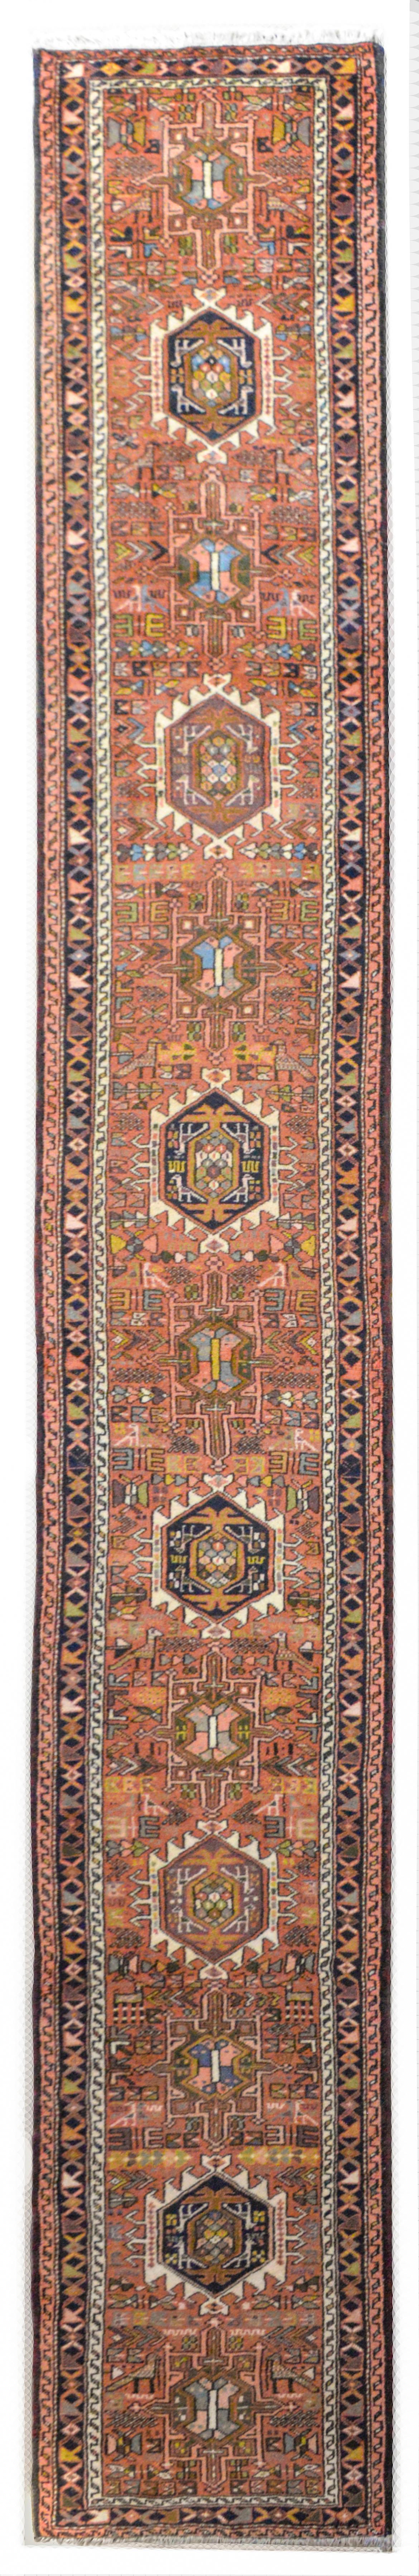 A wonderful early 20th century Persian Karadja runner with several stylized floral medallions woven in black, pink, light blue, gold, and green amidst a field of more stylized flowers against a coral red background. The border is wonderful composed